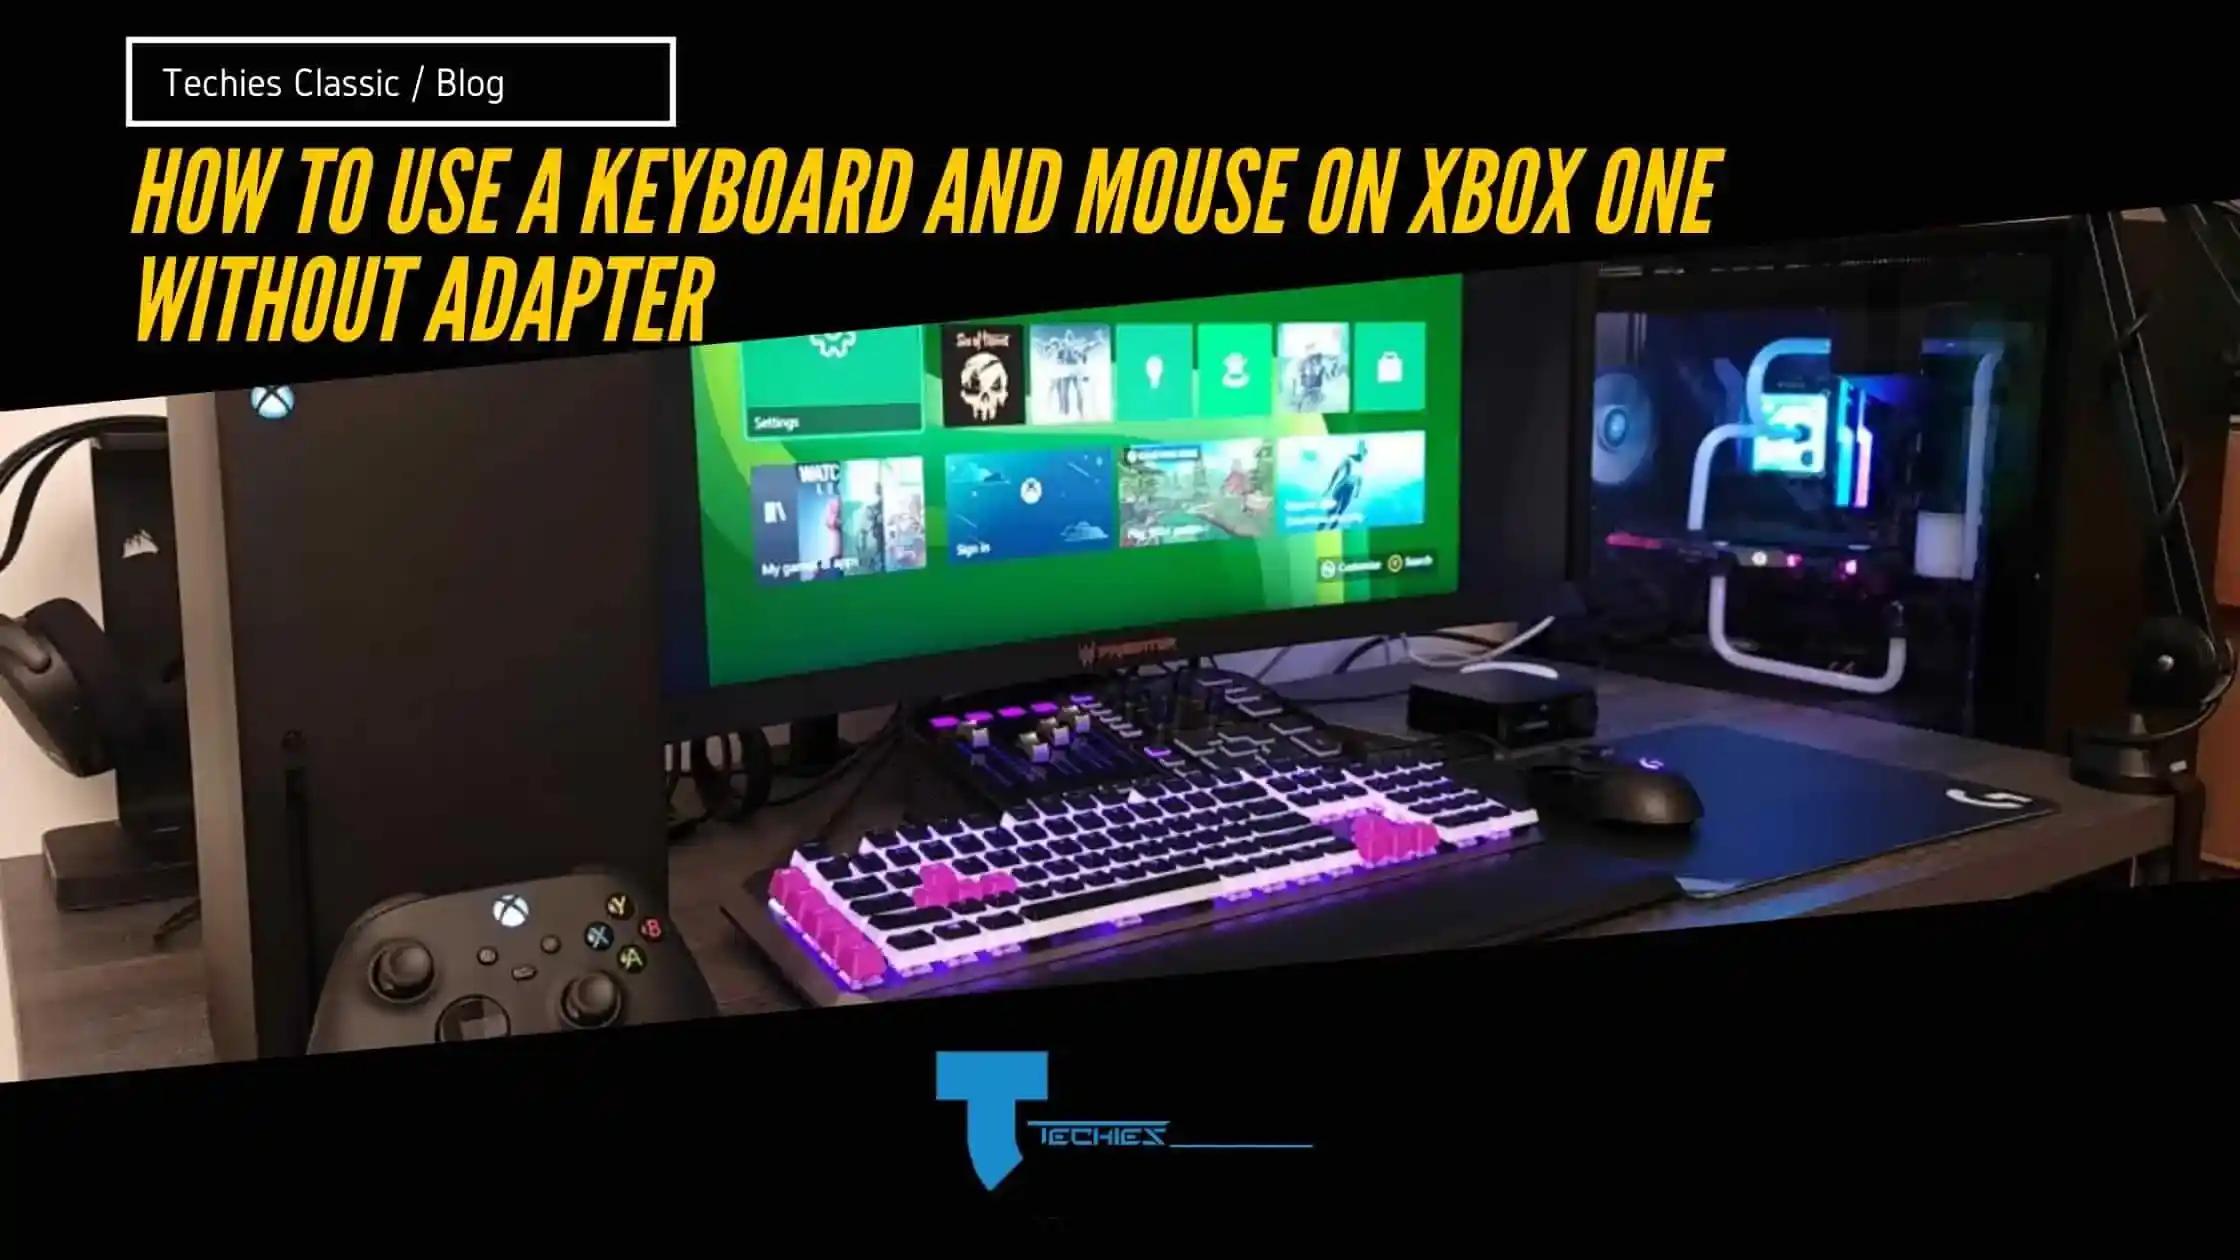 How to use a keyboard and mouse on xbox one without adapter